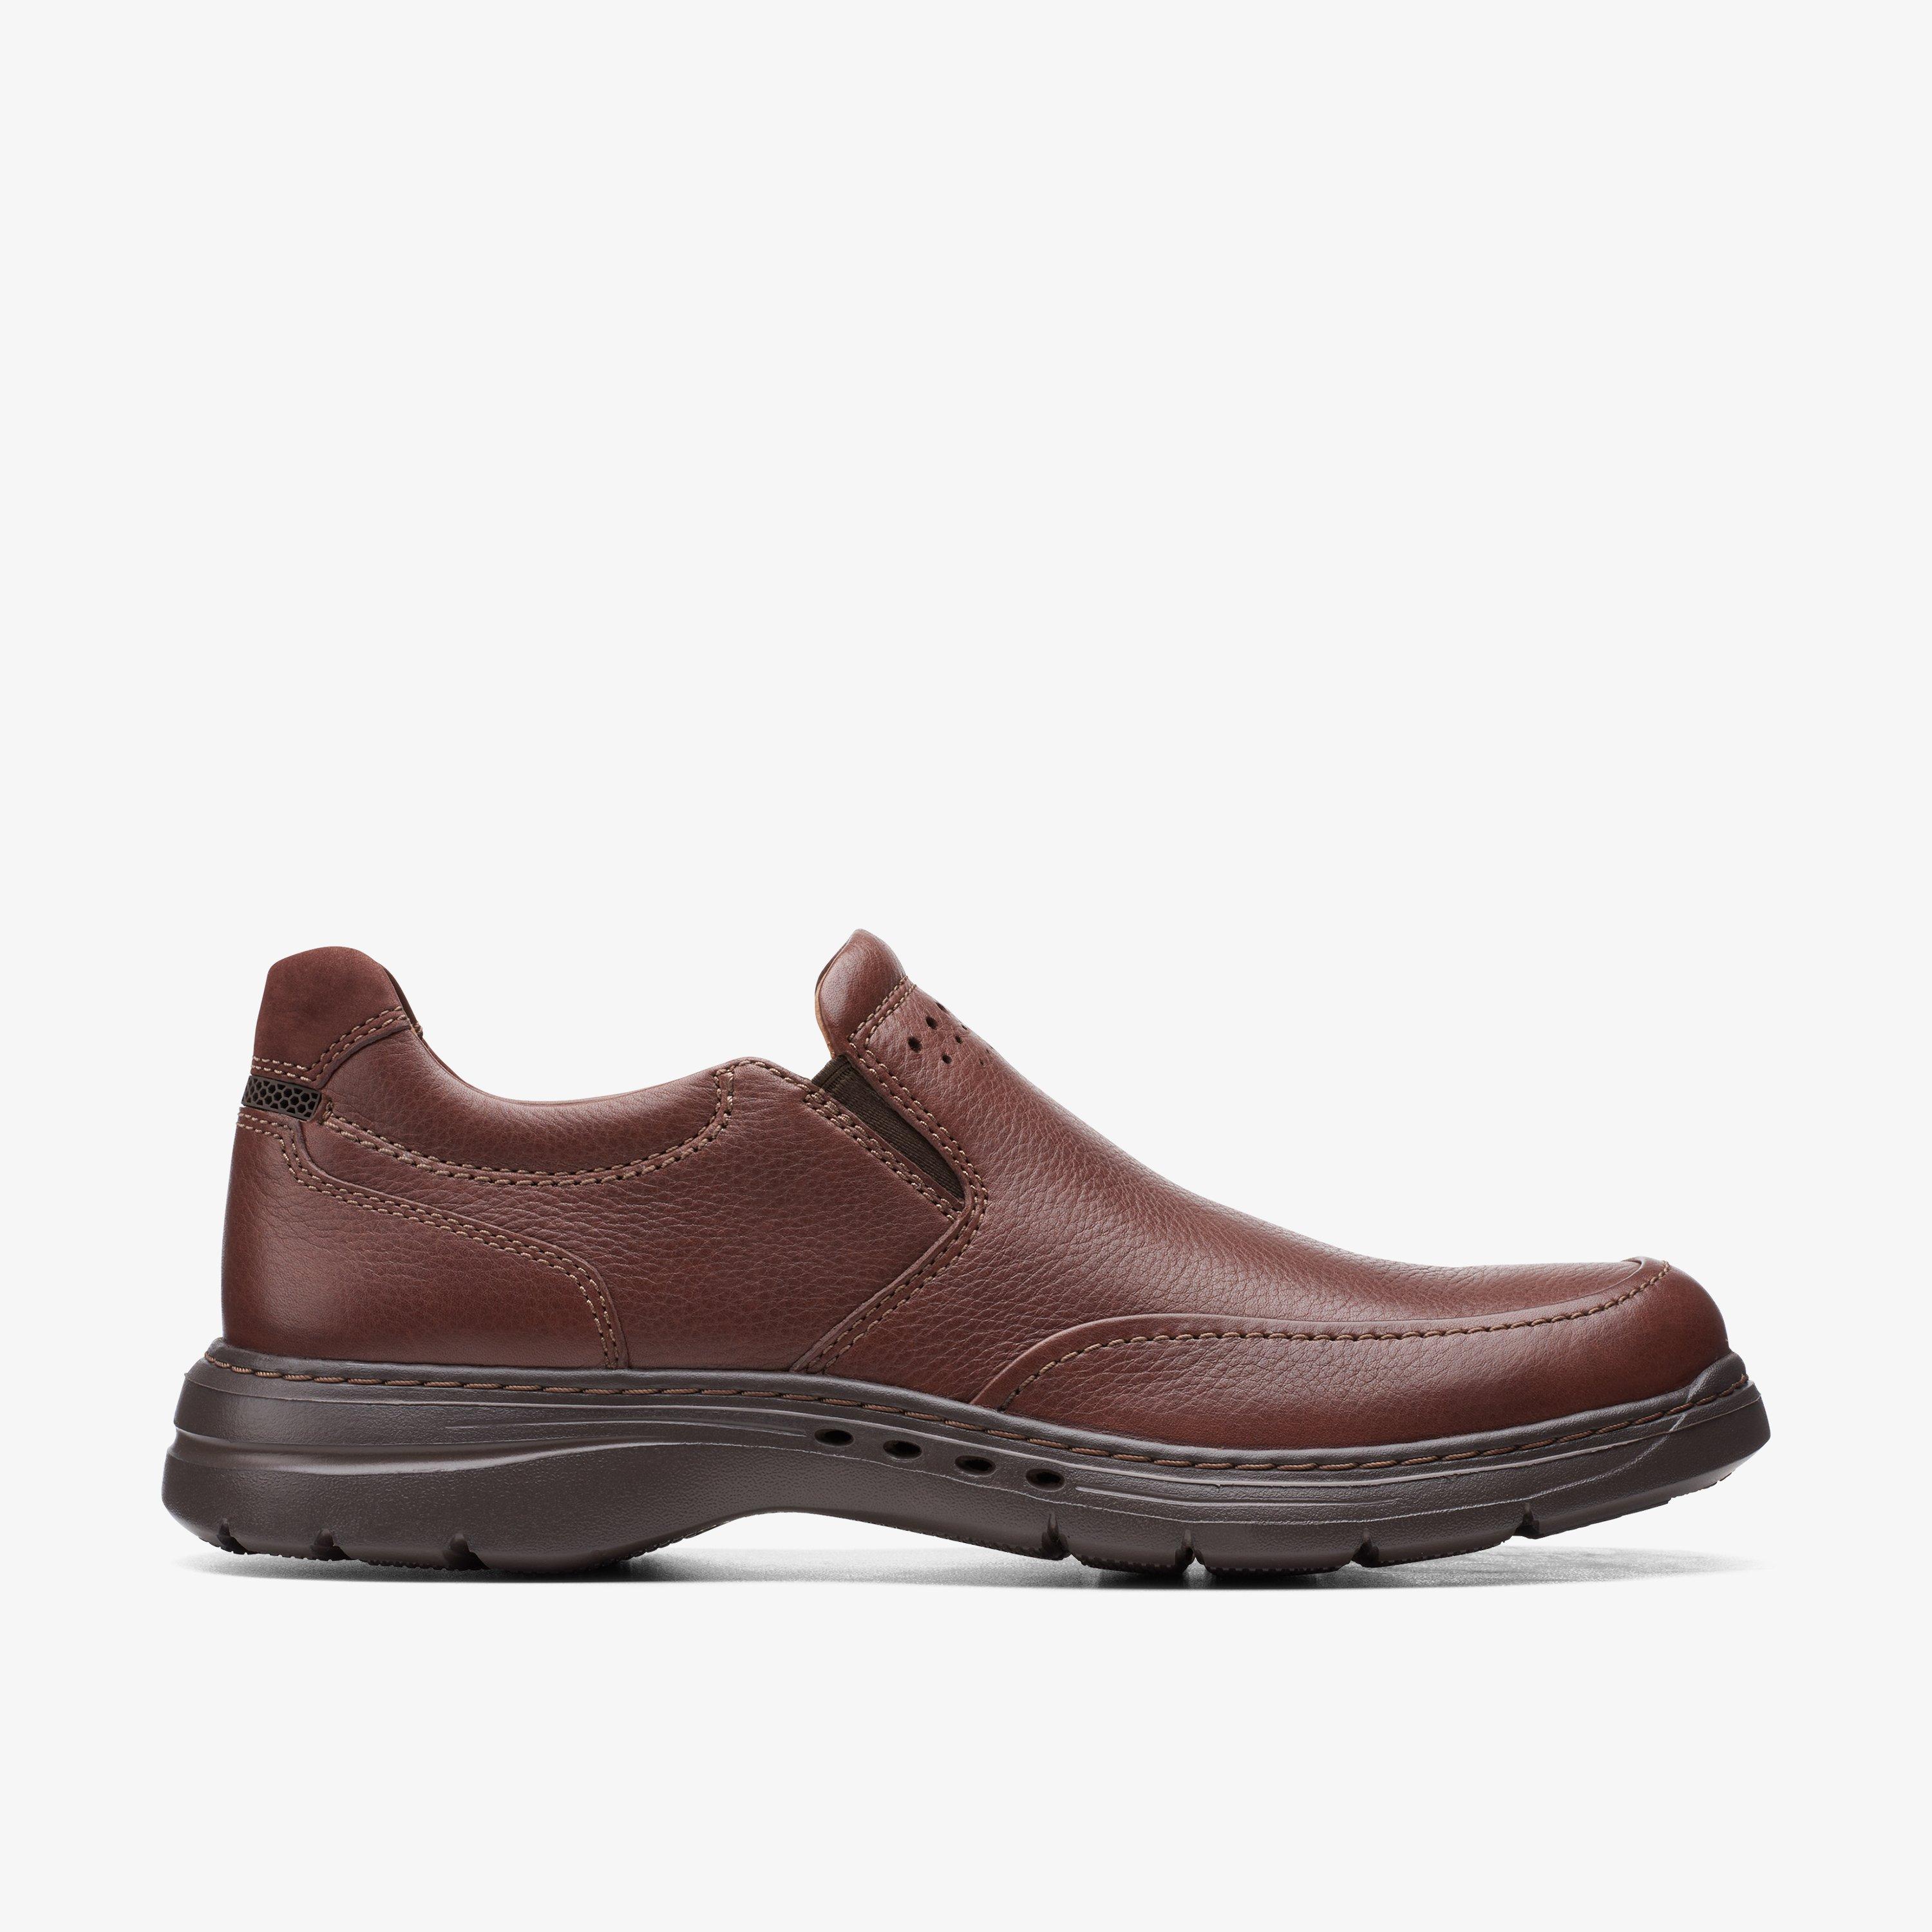 MENS Un Brawley Step Mahogany Leather Loafers | Clarks US